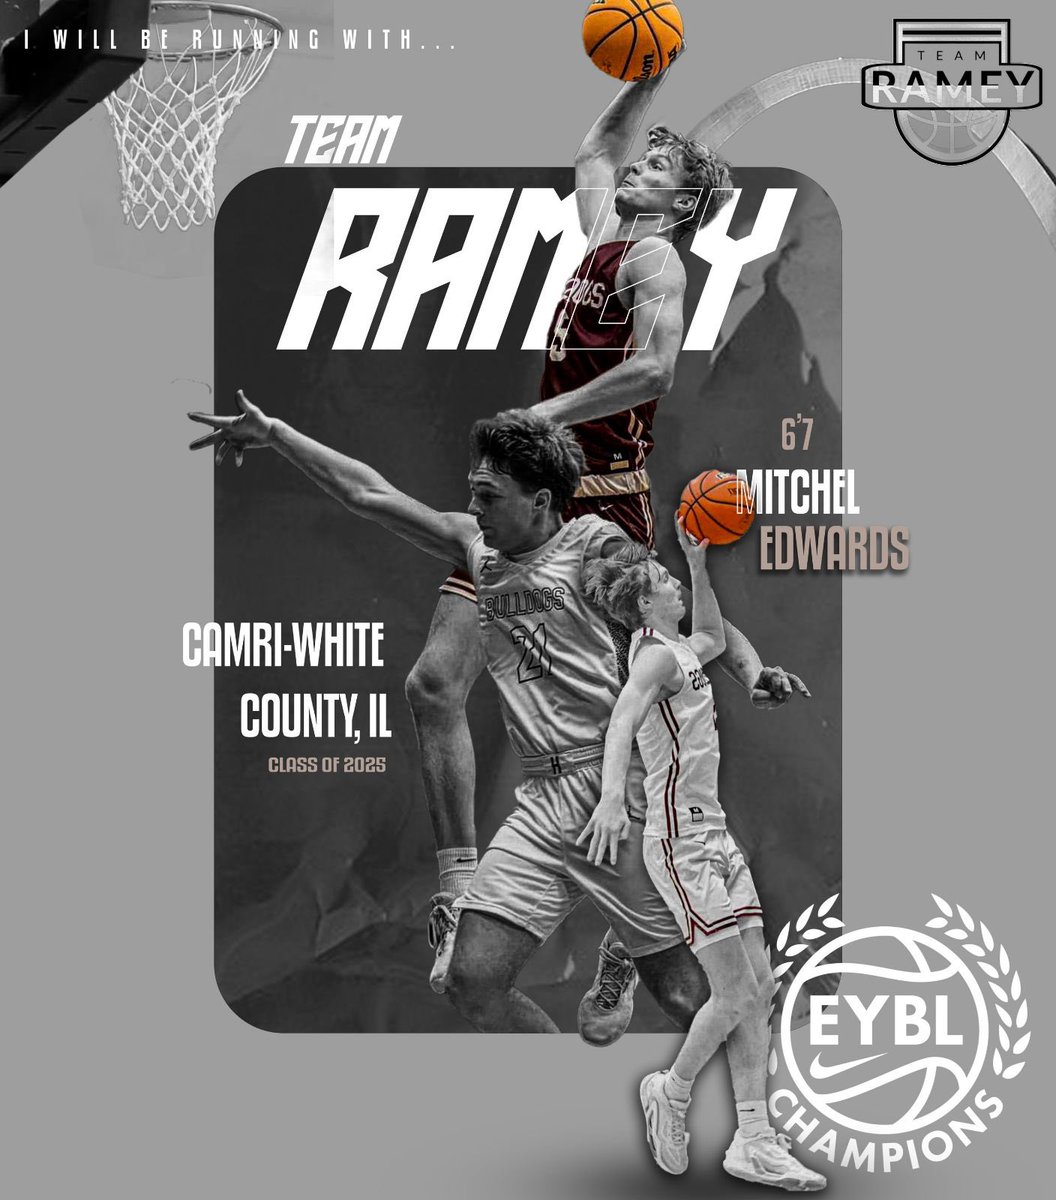 Great to be playing with Team Ramey this year! @Rameybasketball